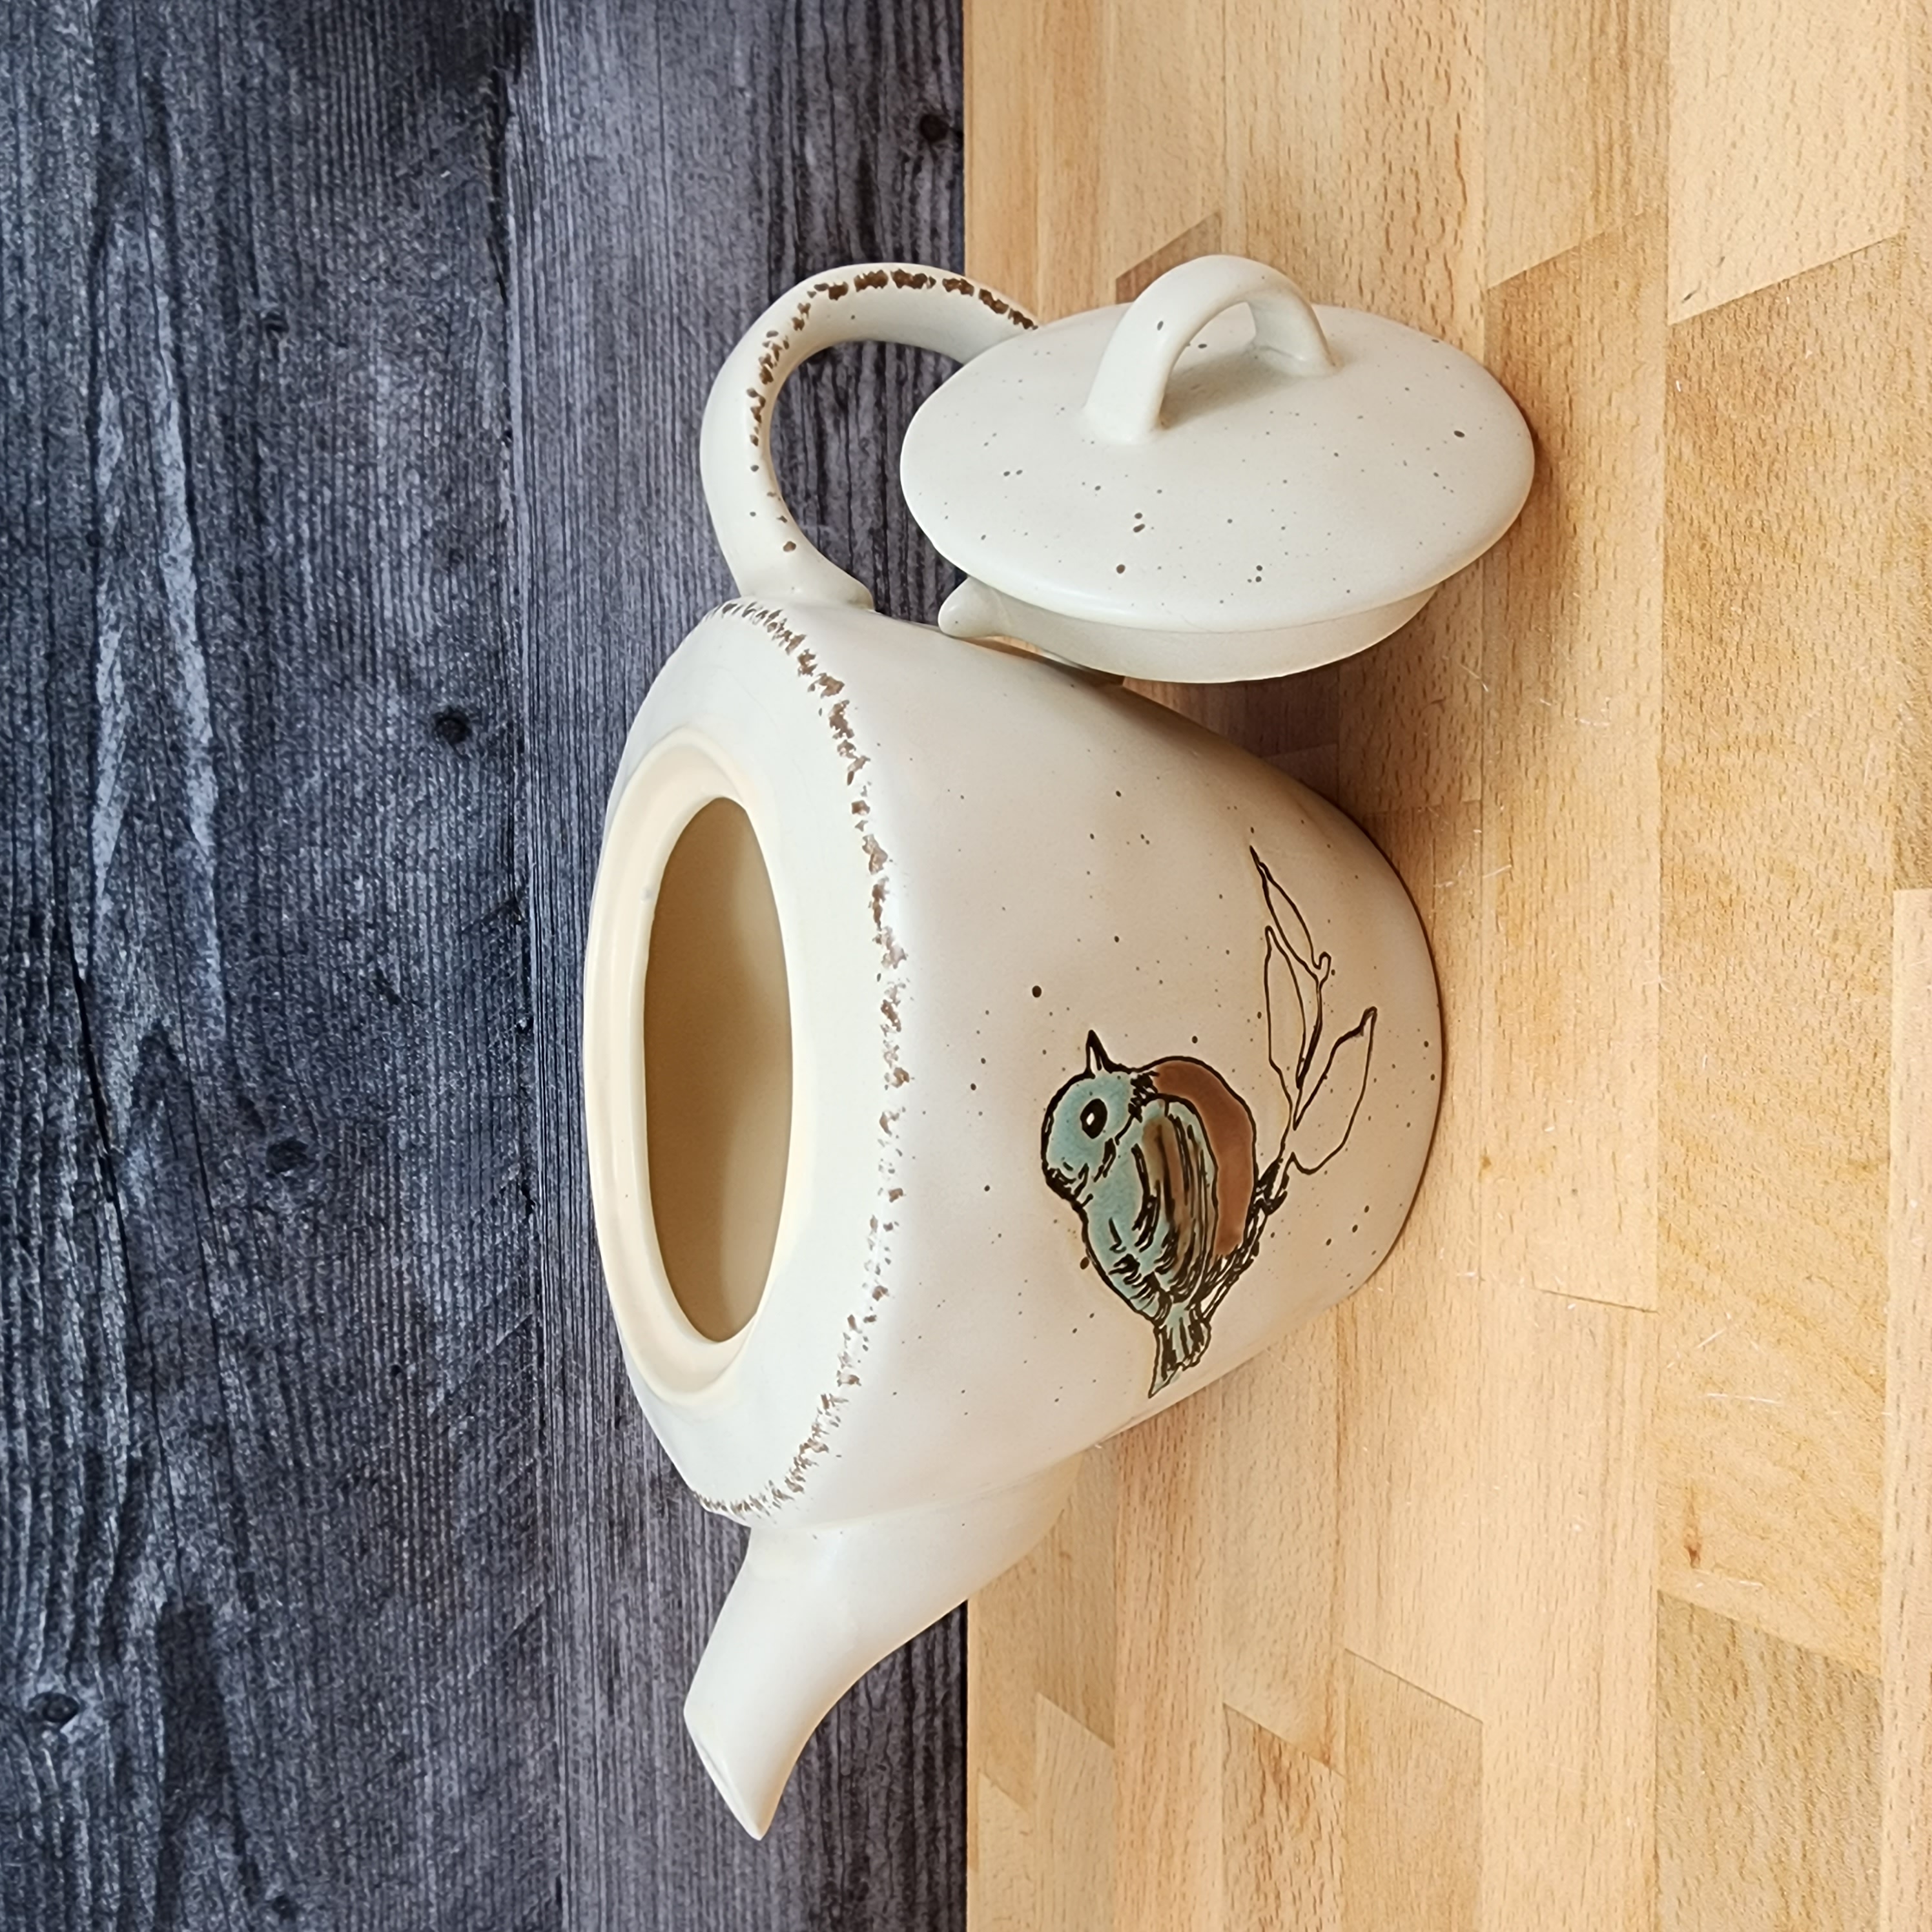 This Embossed Bird Teapot Kitchen Decorative Collectable by Blue Sky is made with love by Premier Homegoods! Shop more unique gift ideas today with Spots Initiatives, the best way to support creators.